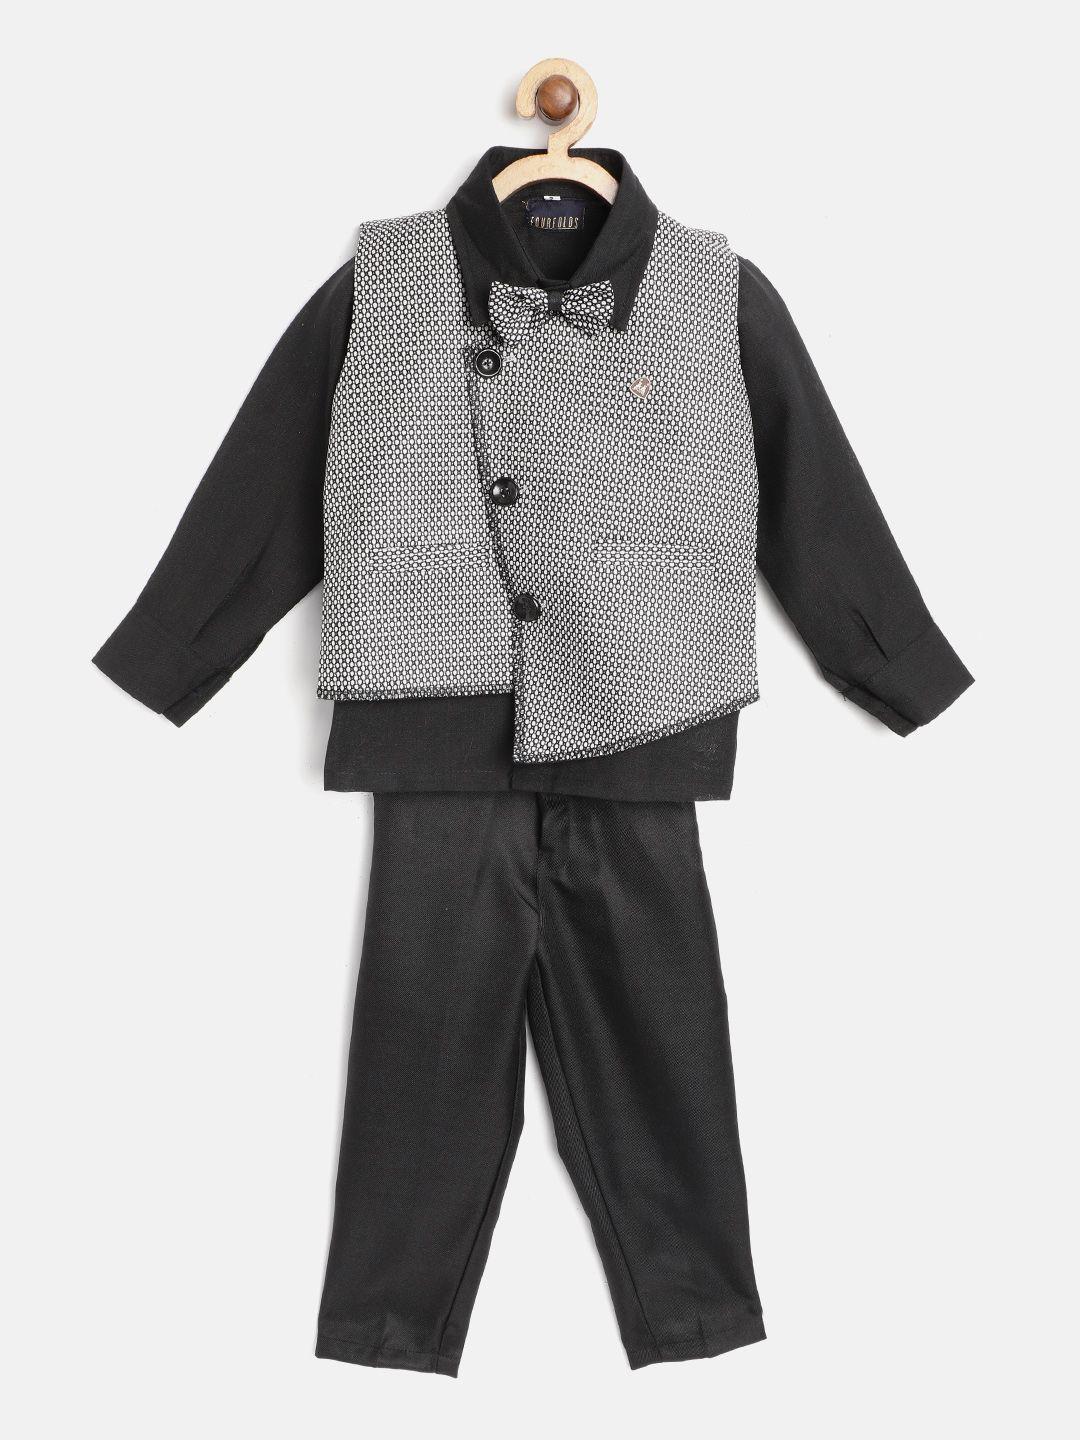 fourfolds boys black solid shirt with trousers woven design waistcoat & bow tie